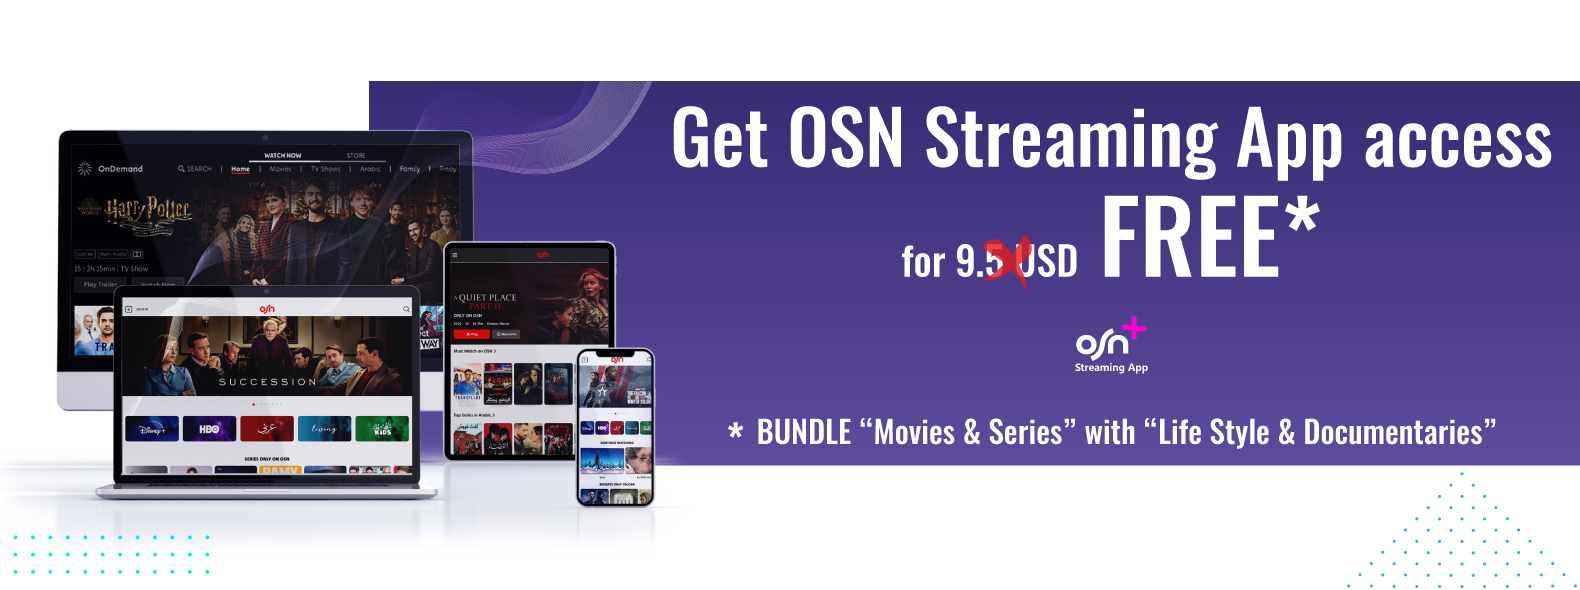 osn_streaming